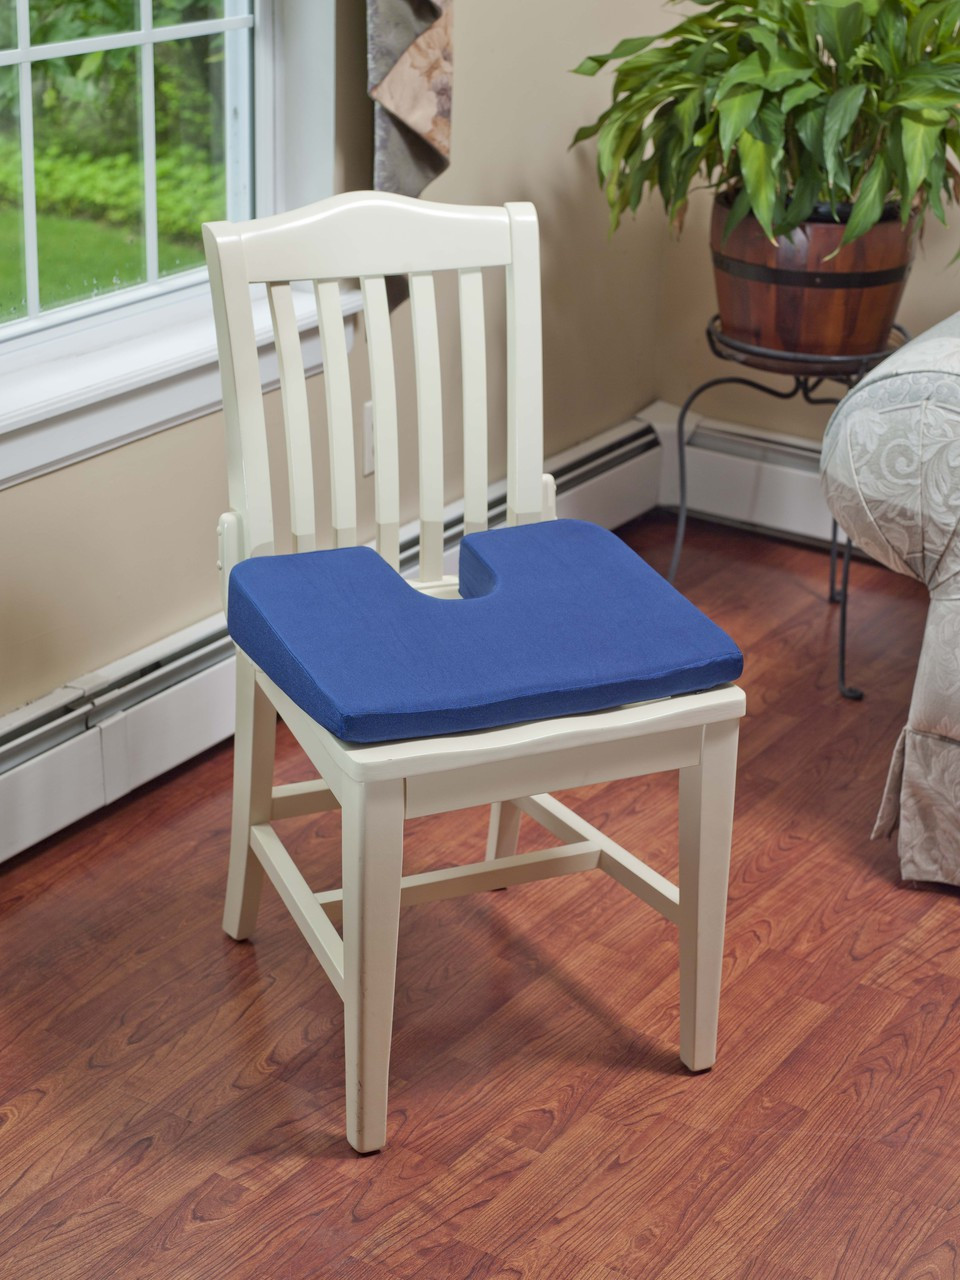 Forsite Cool Therapy Gel Seat Cushion 